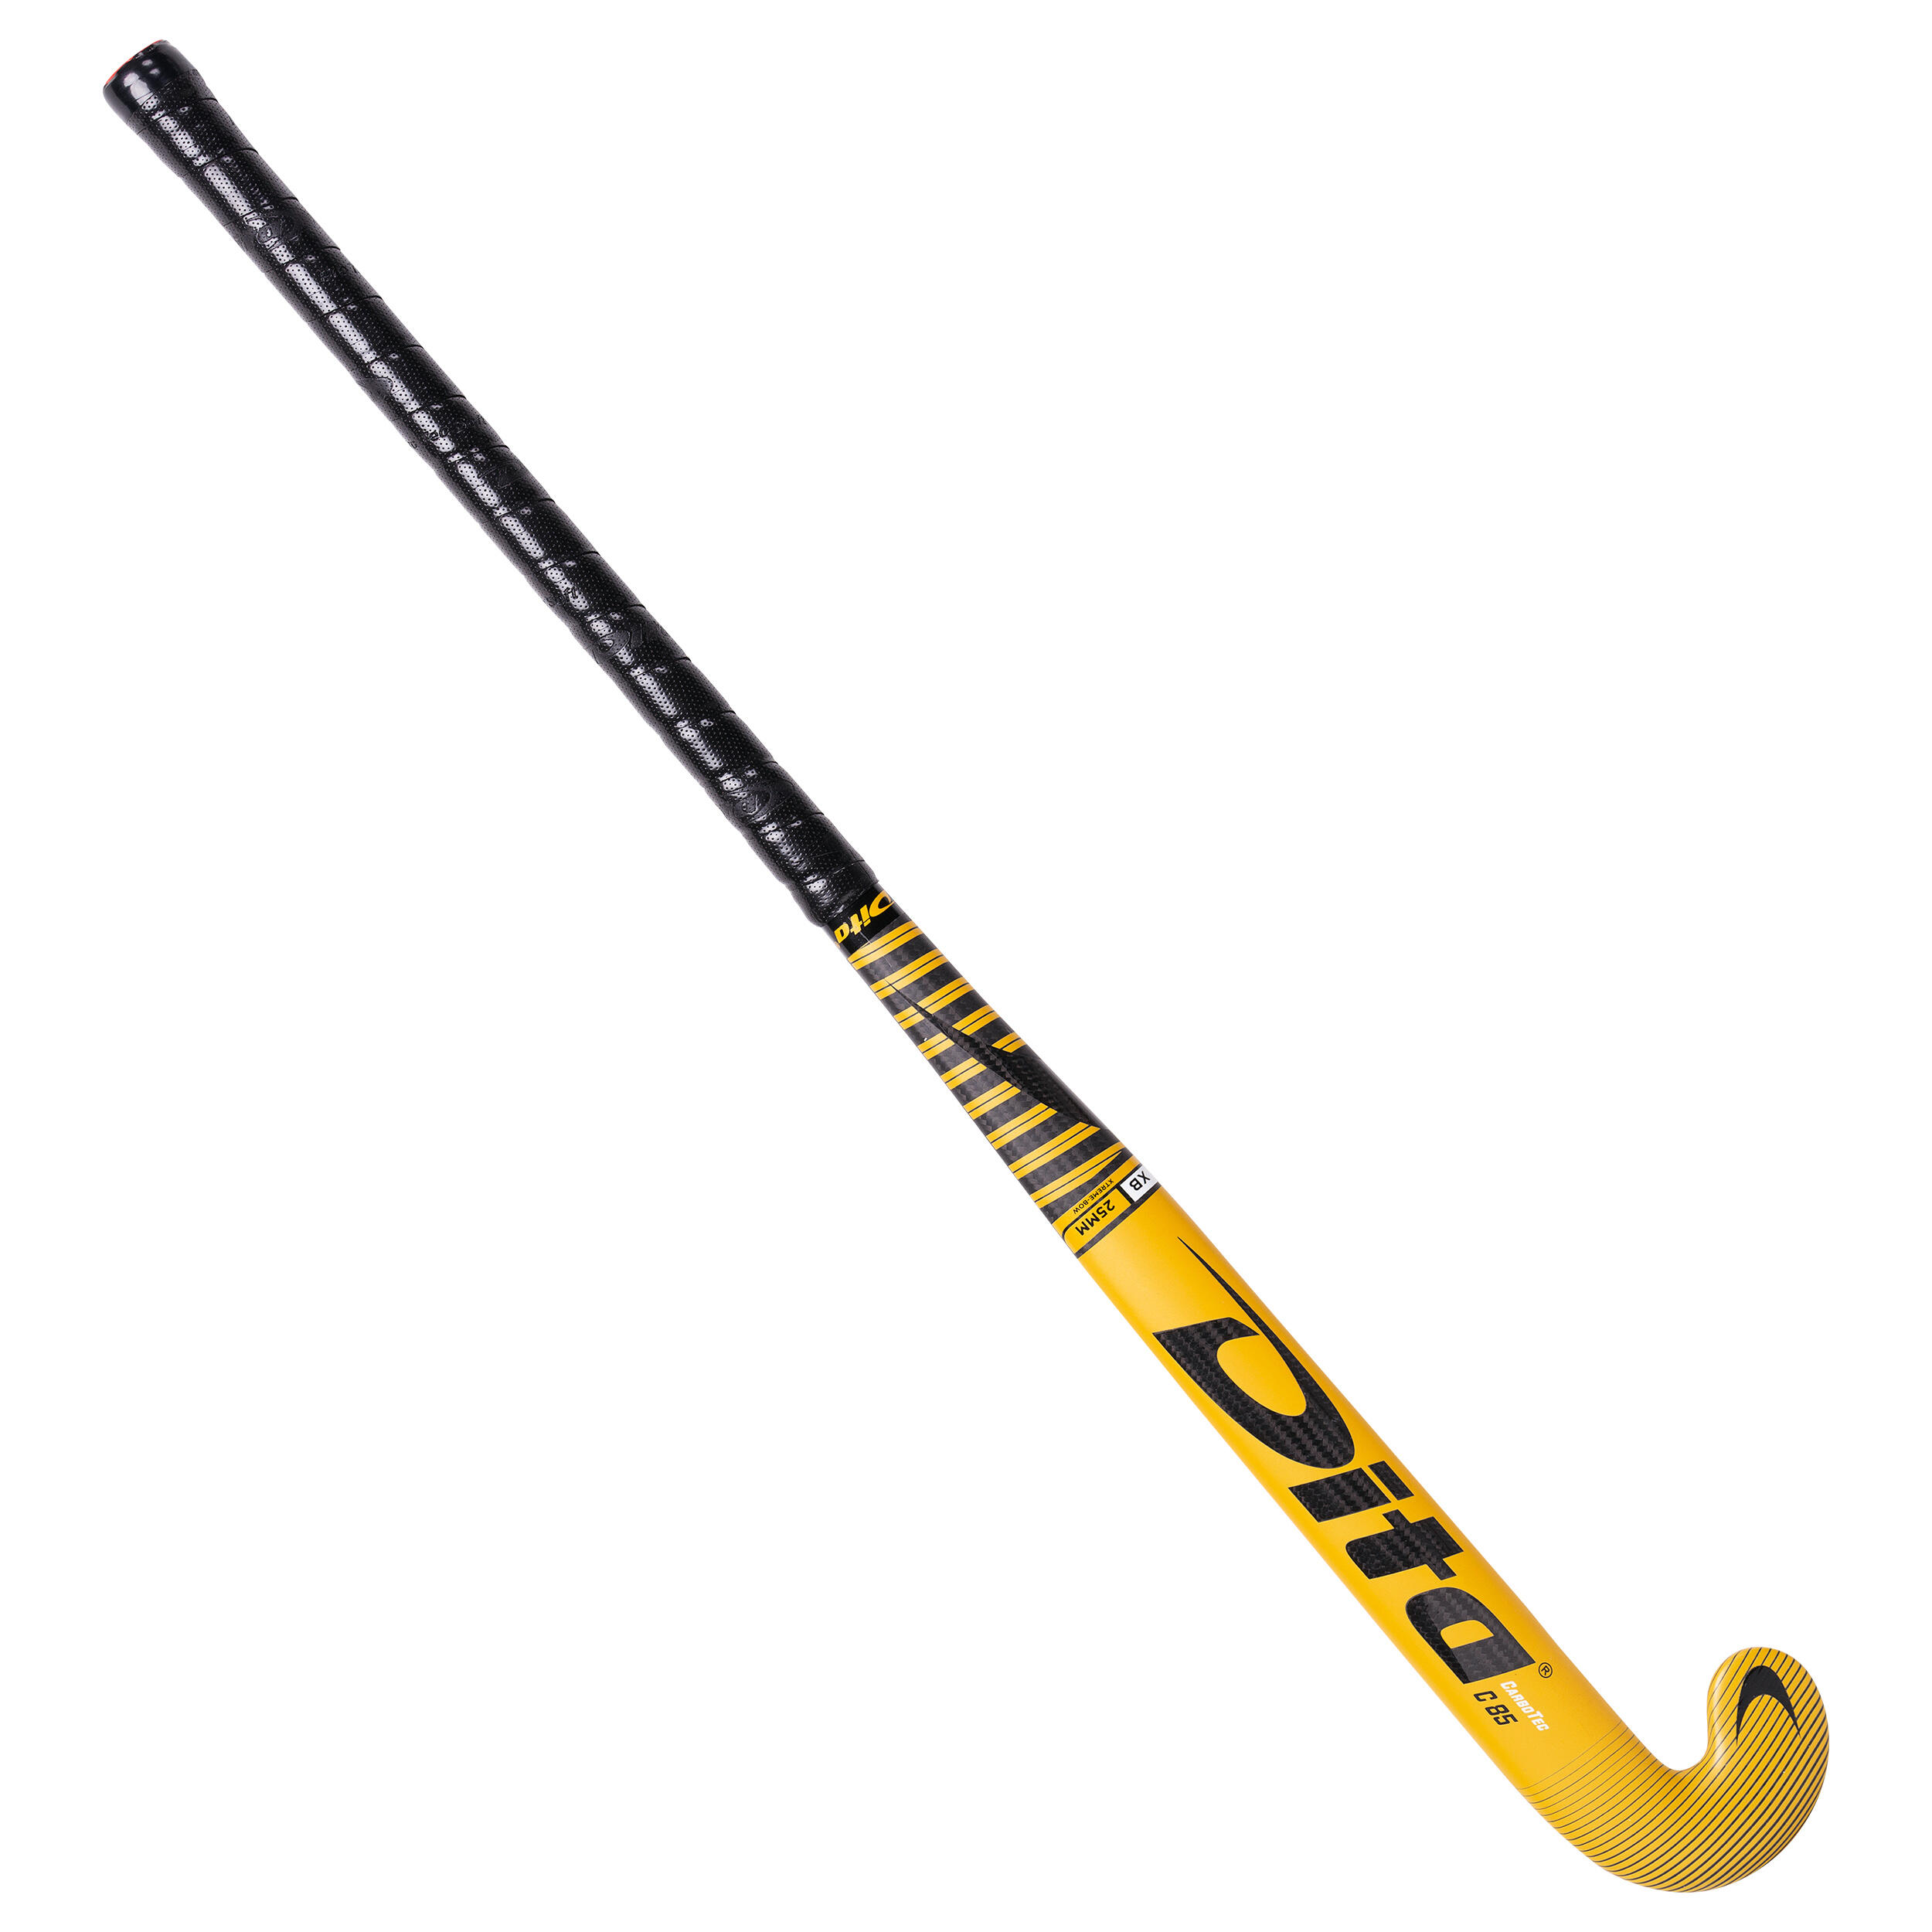 Adult Advanced 85% Carbon X Low Bow Field Hockey Stick carbotecC85 - Gold/Black 8/13